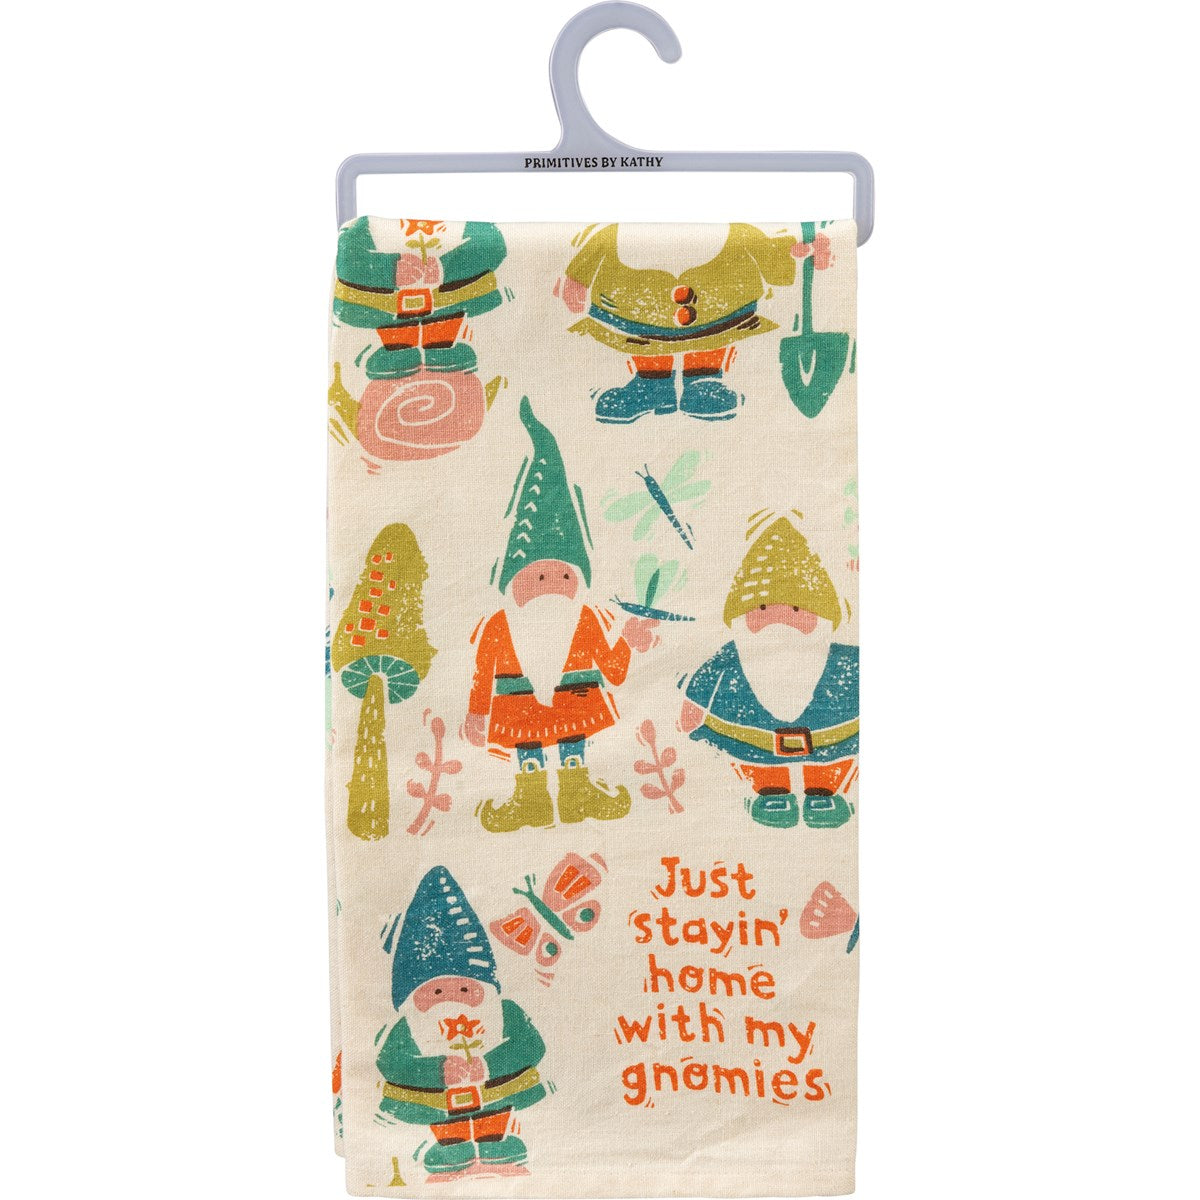 "JUST STAYIN' HOME WITH MY GNOMIES" DISH TOWEL